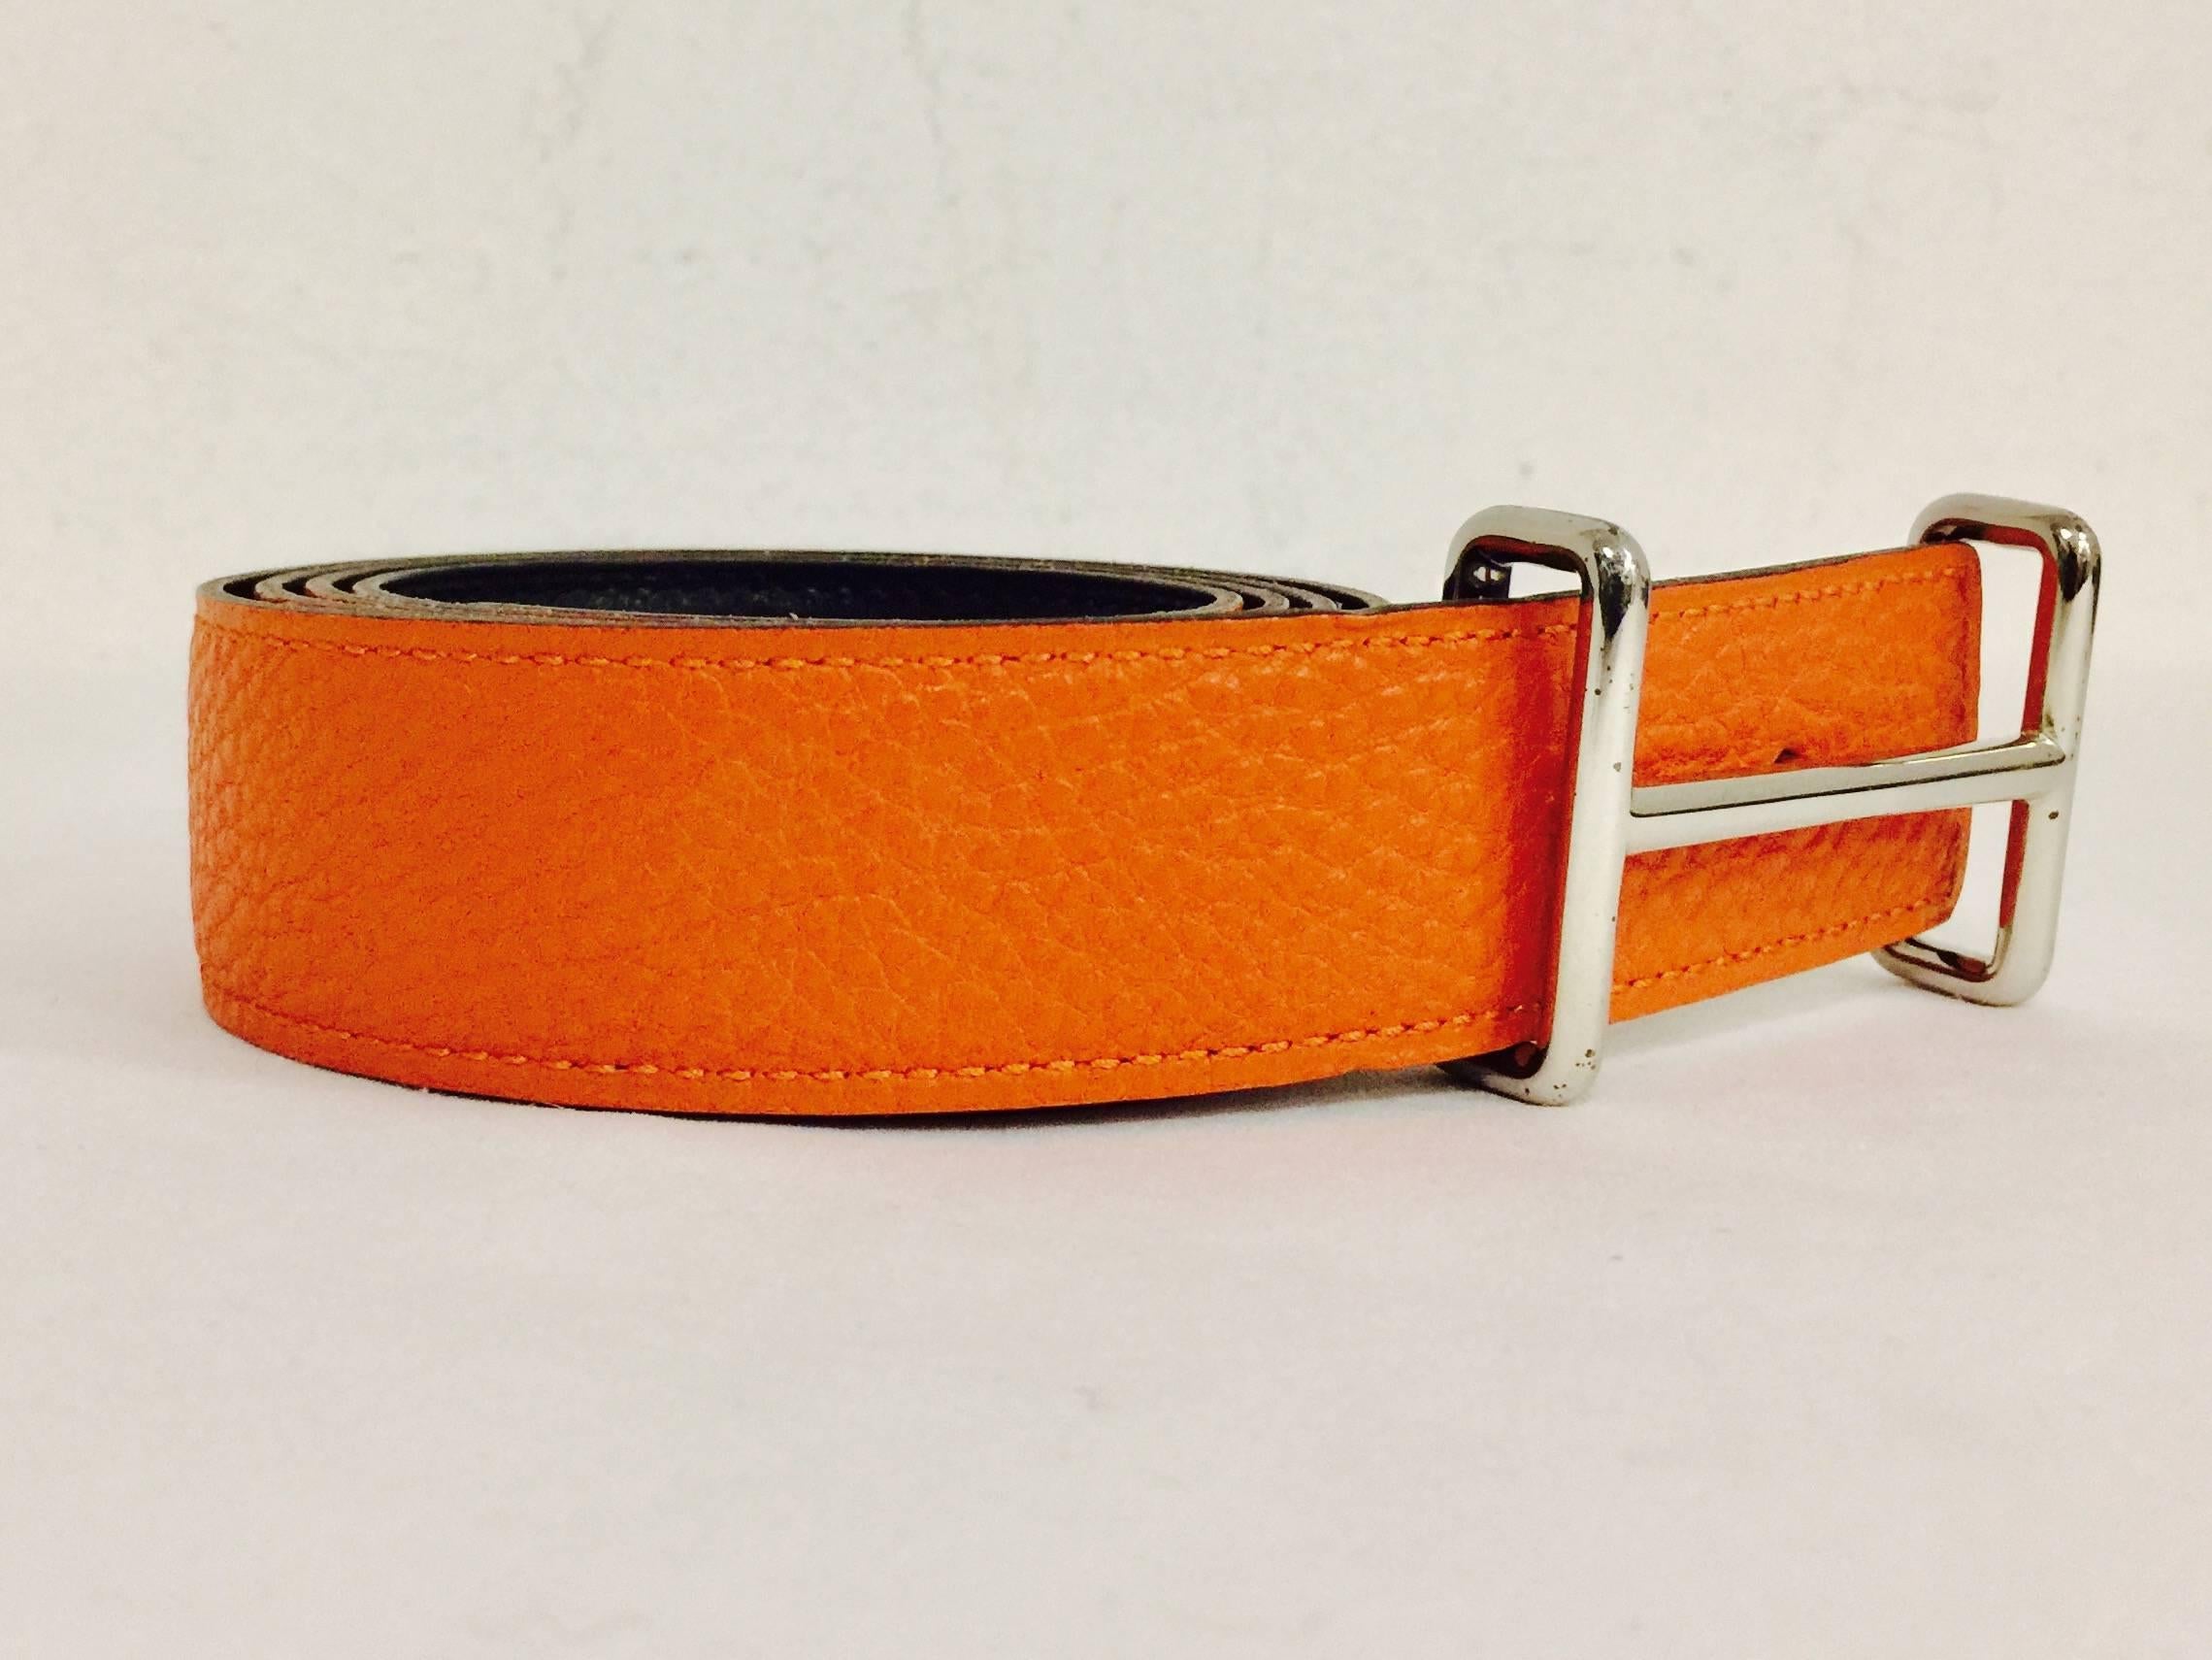 2004 Hermes Reversible Orange Togo and Black Chamonix Belt is perfect for a man or a woman!  Features signature orange and black combination with Palladium Idem buckle.  Stamped H in a Square.  Made in France.  Fits Waists 38